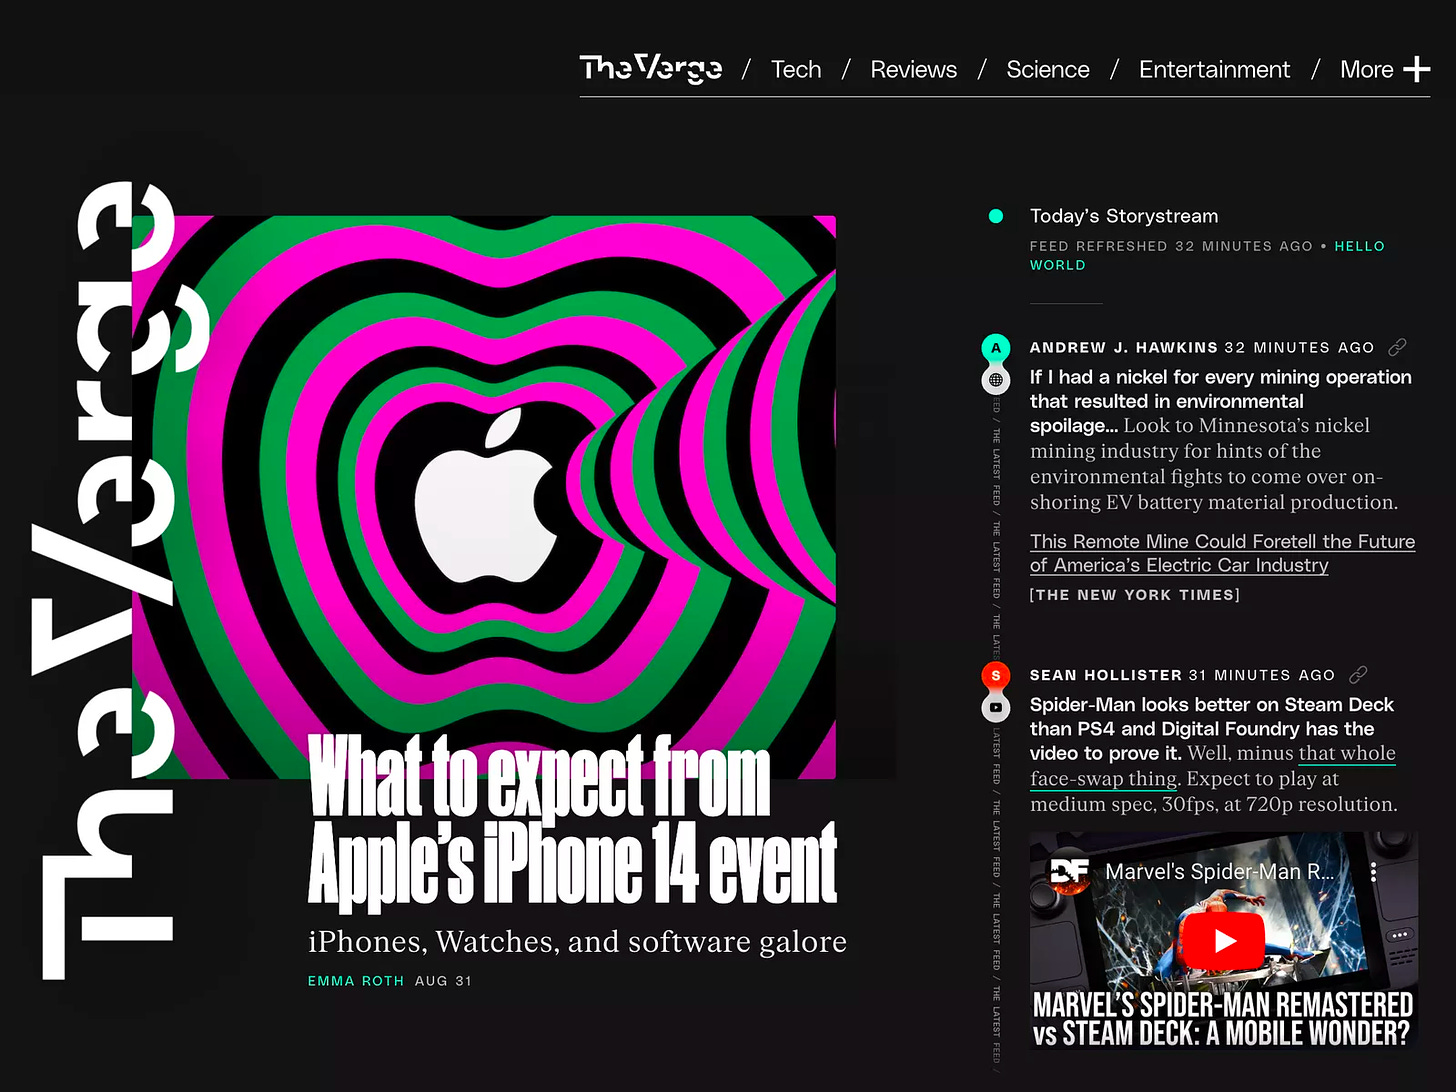 Home page of The Verge website